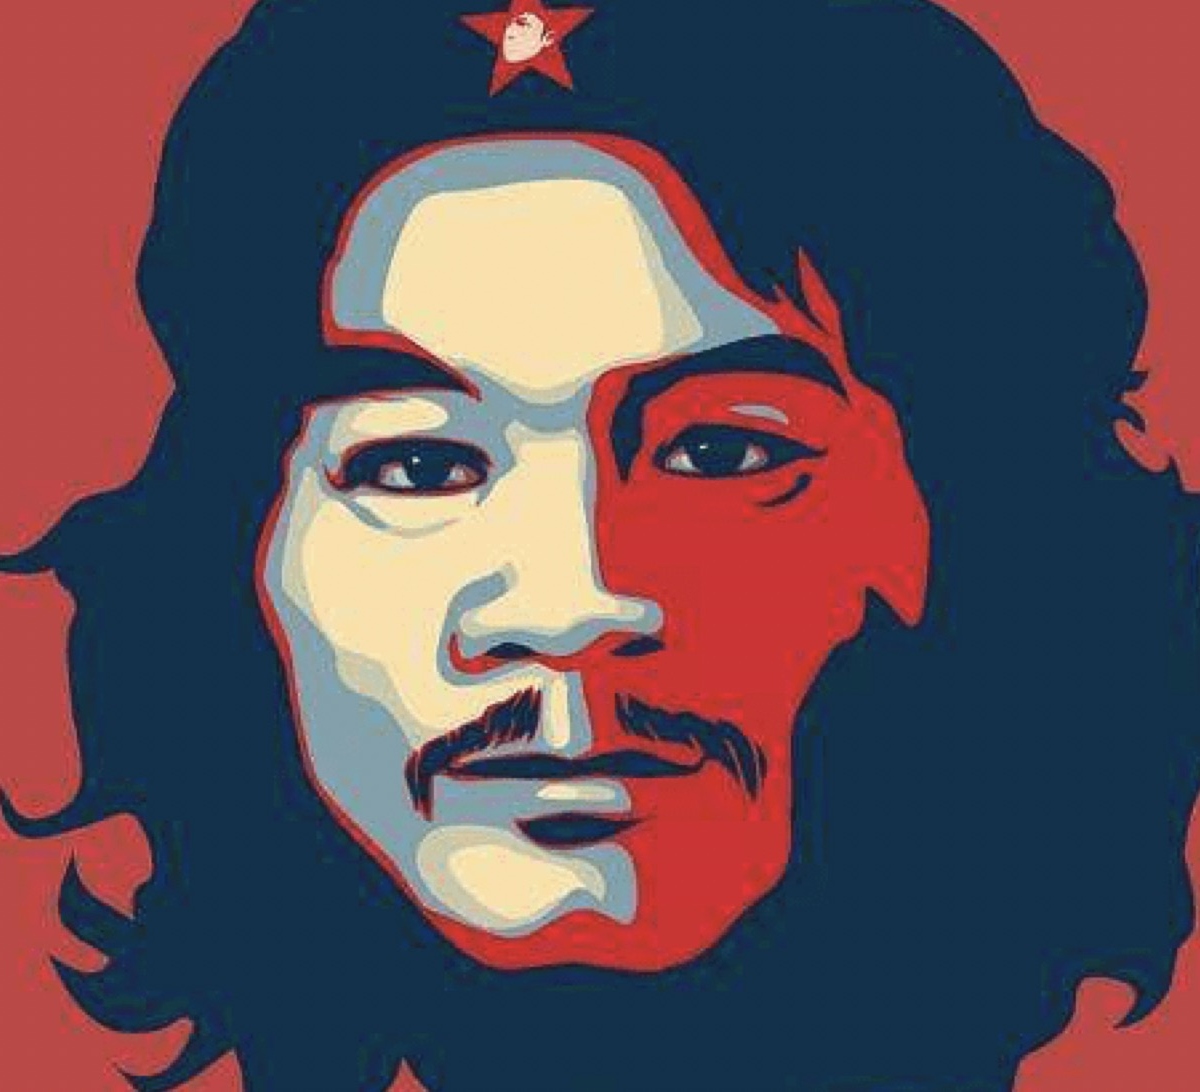 Face of long-departed Che Guevara has become a pop culture image